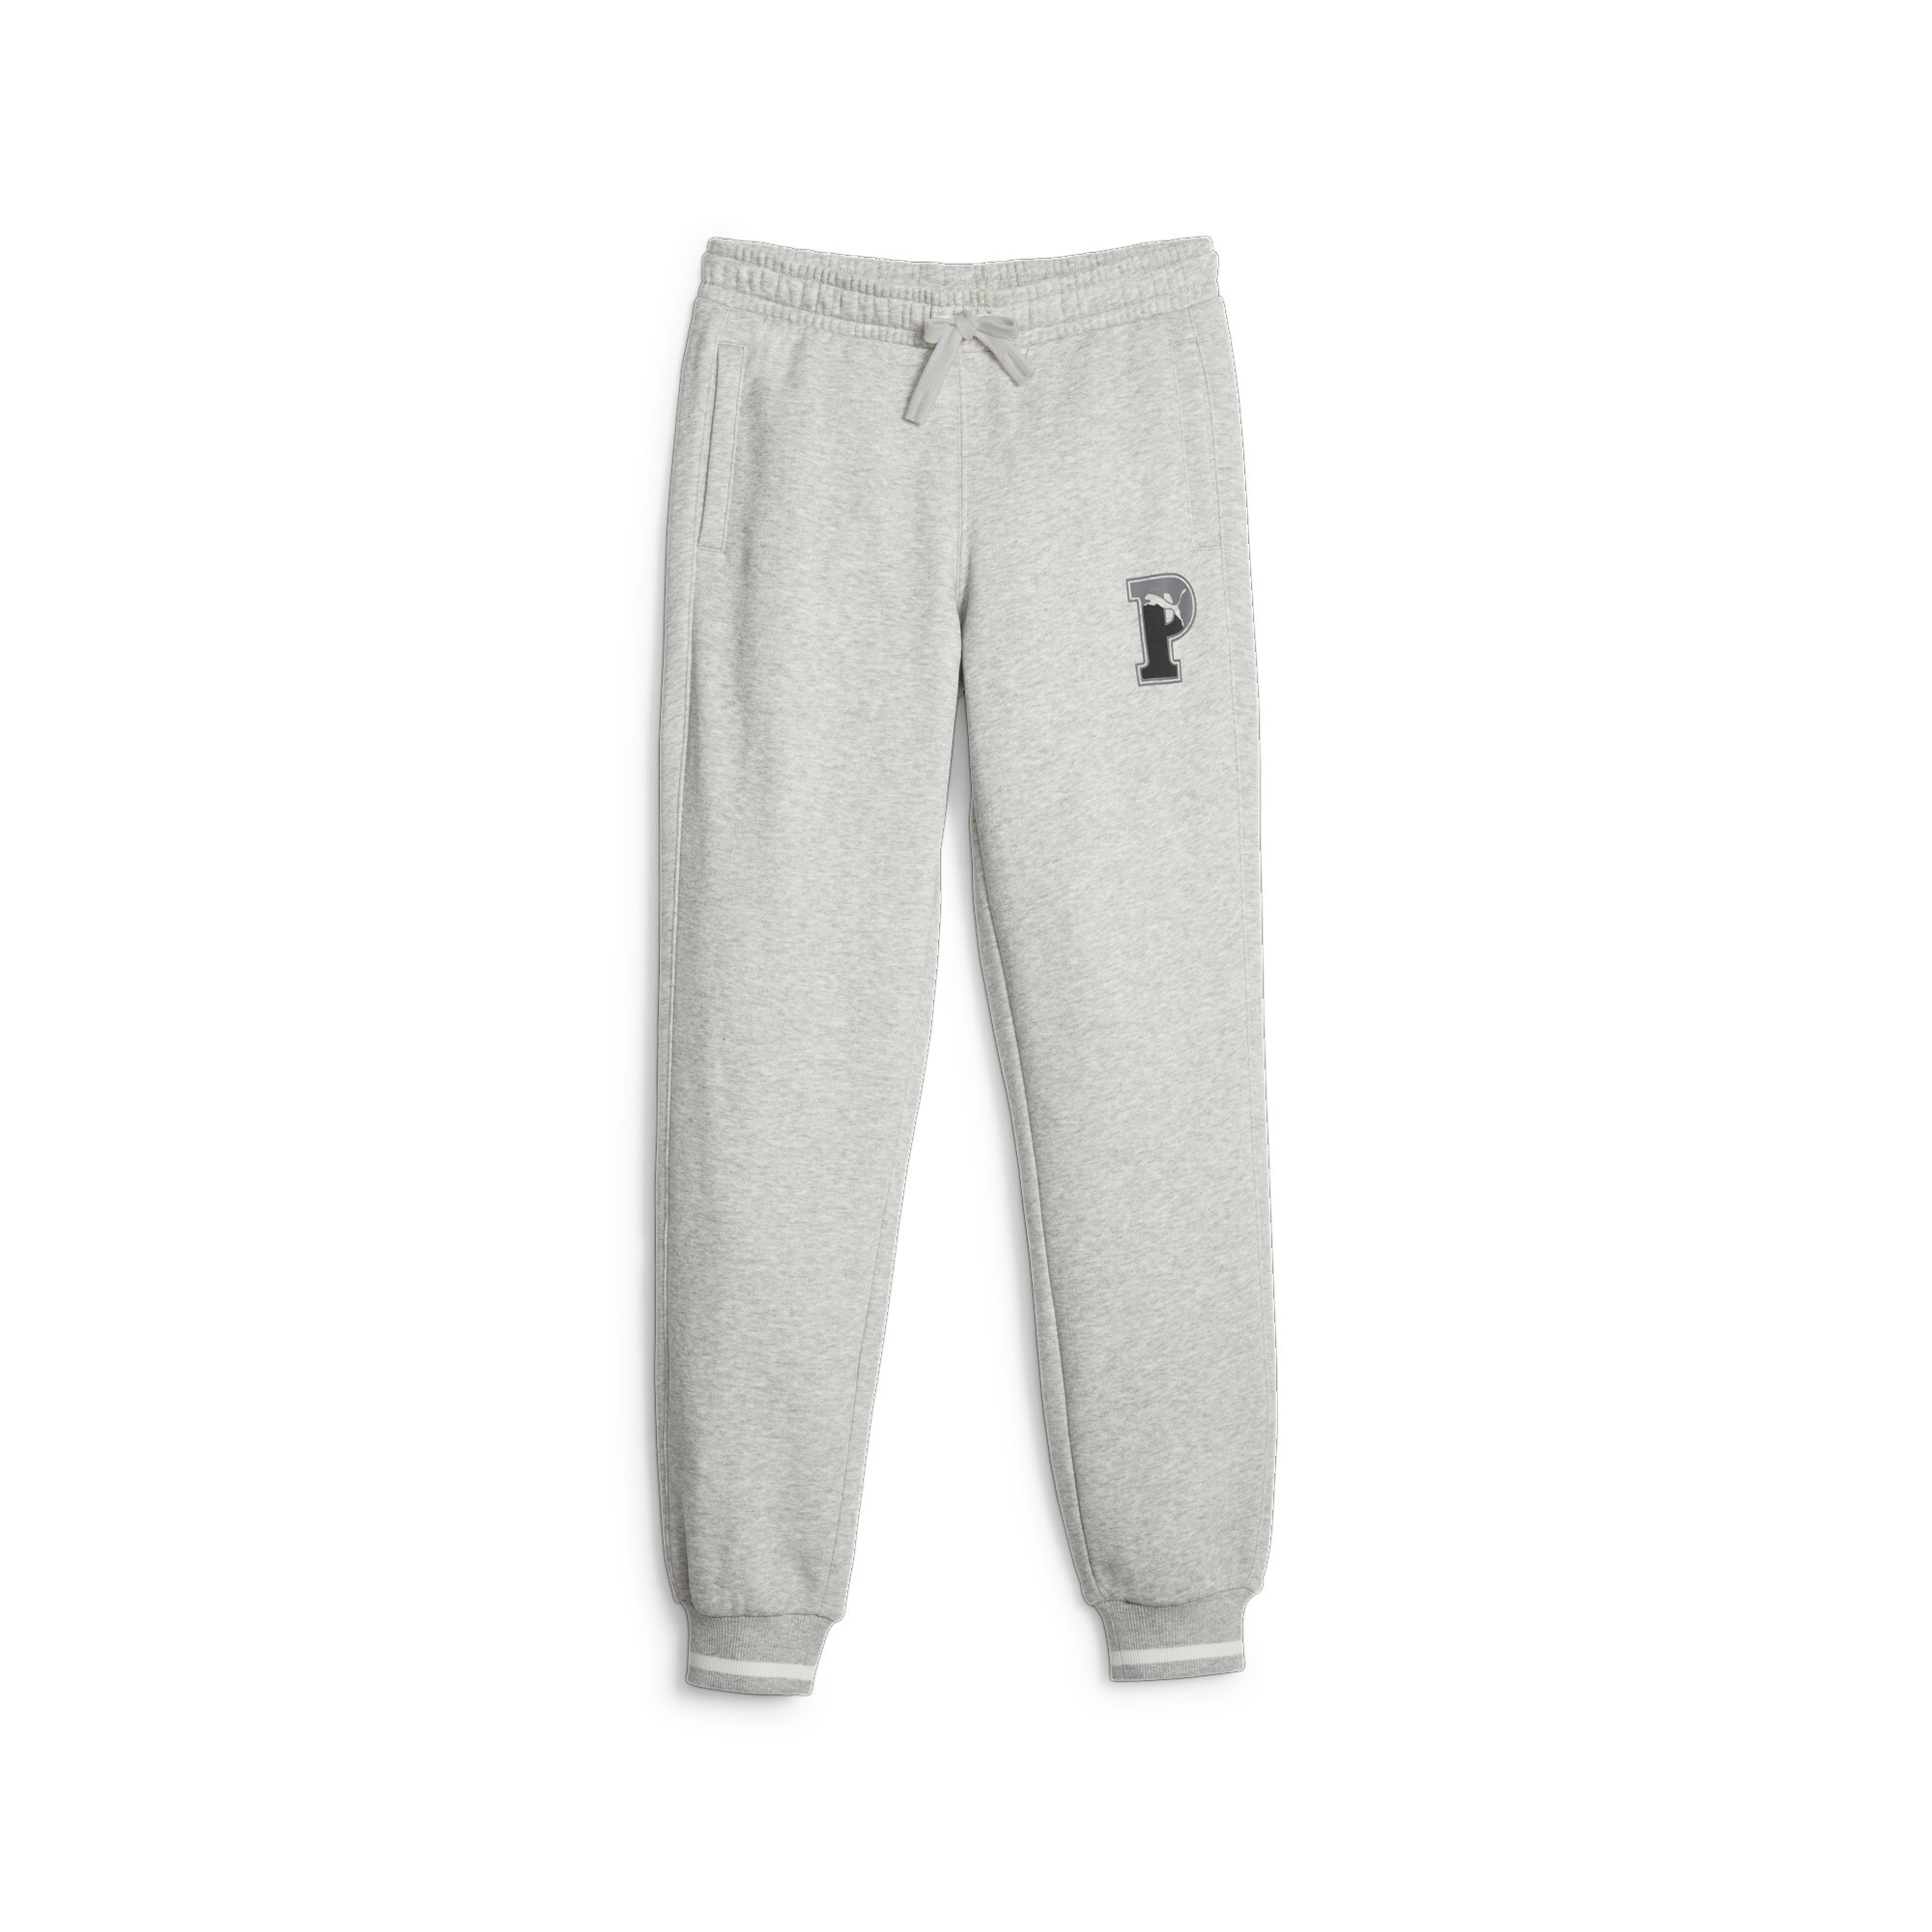 PUMA SQUAD Sweatpants In Heather, Size 15-16 Youth